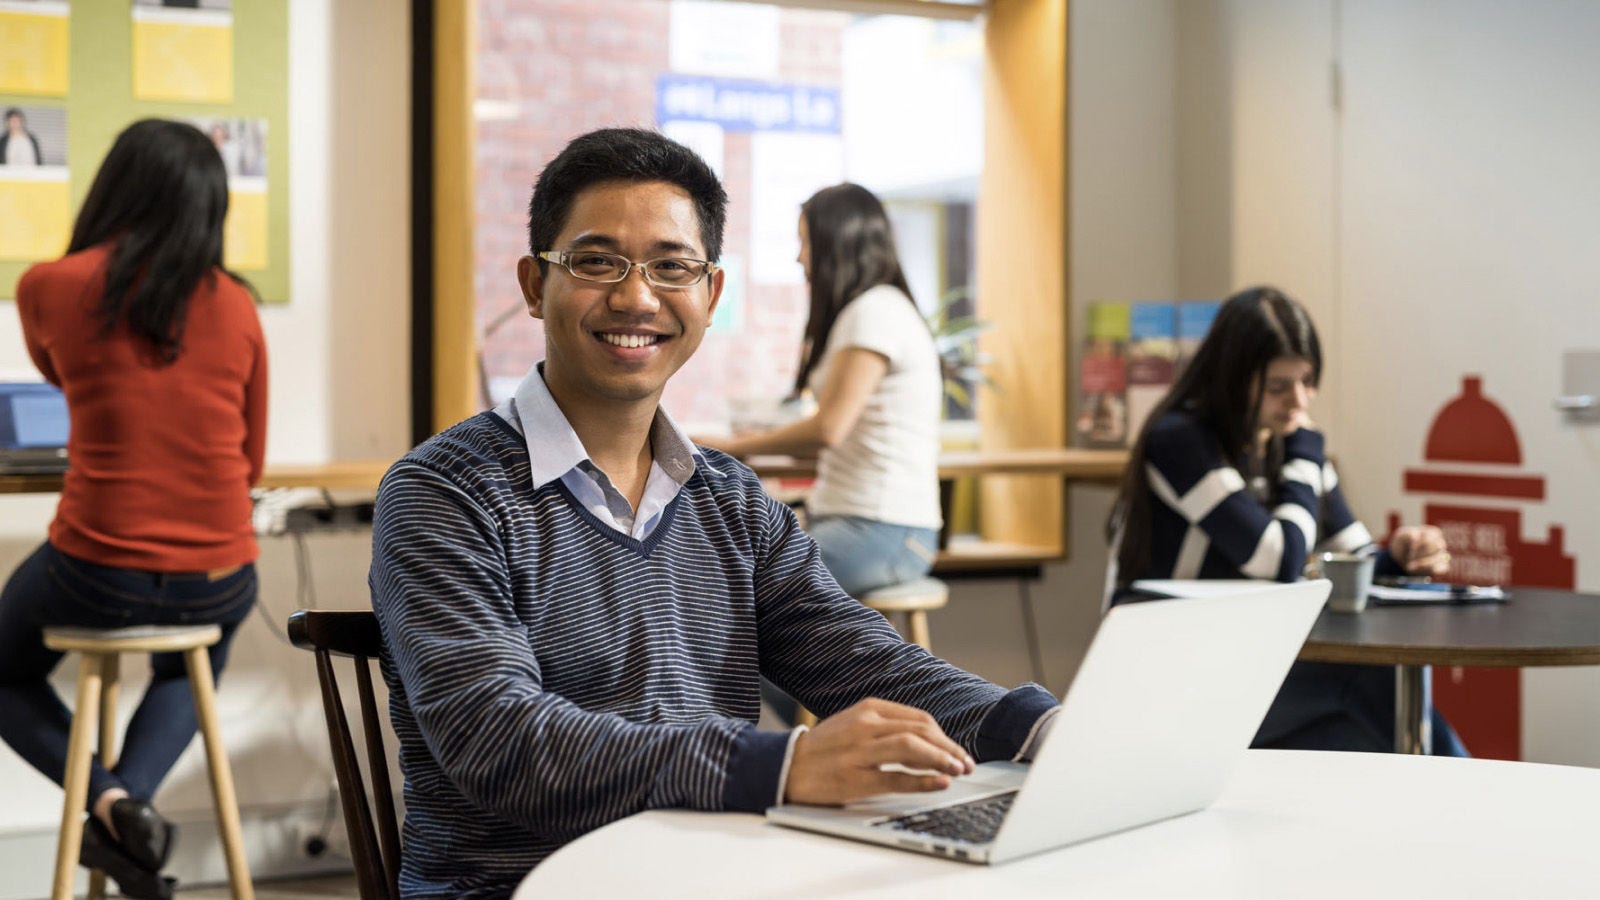 Student smiling at computer